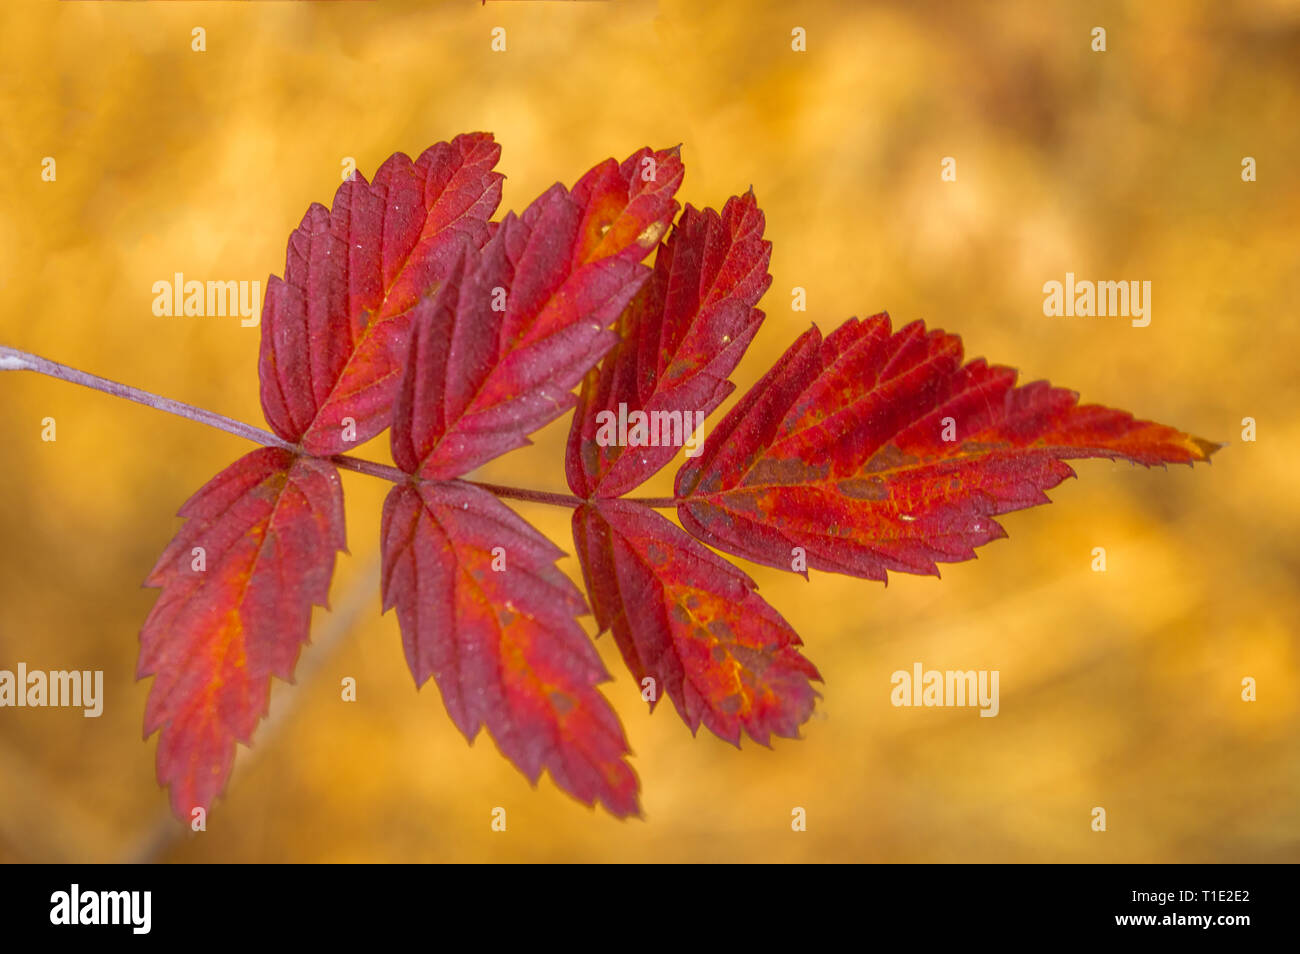 Mulberry Leaves Autumn High Resolution Stock Photography and Images - Alamy